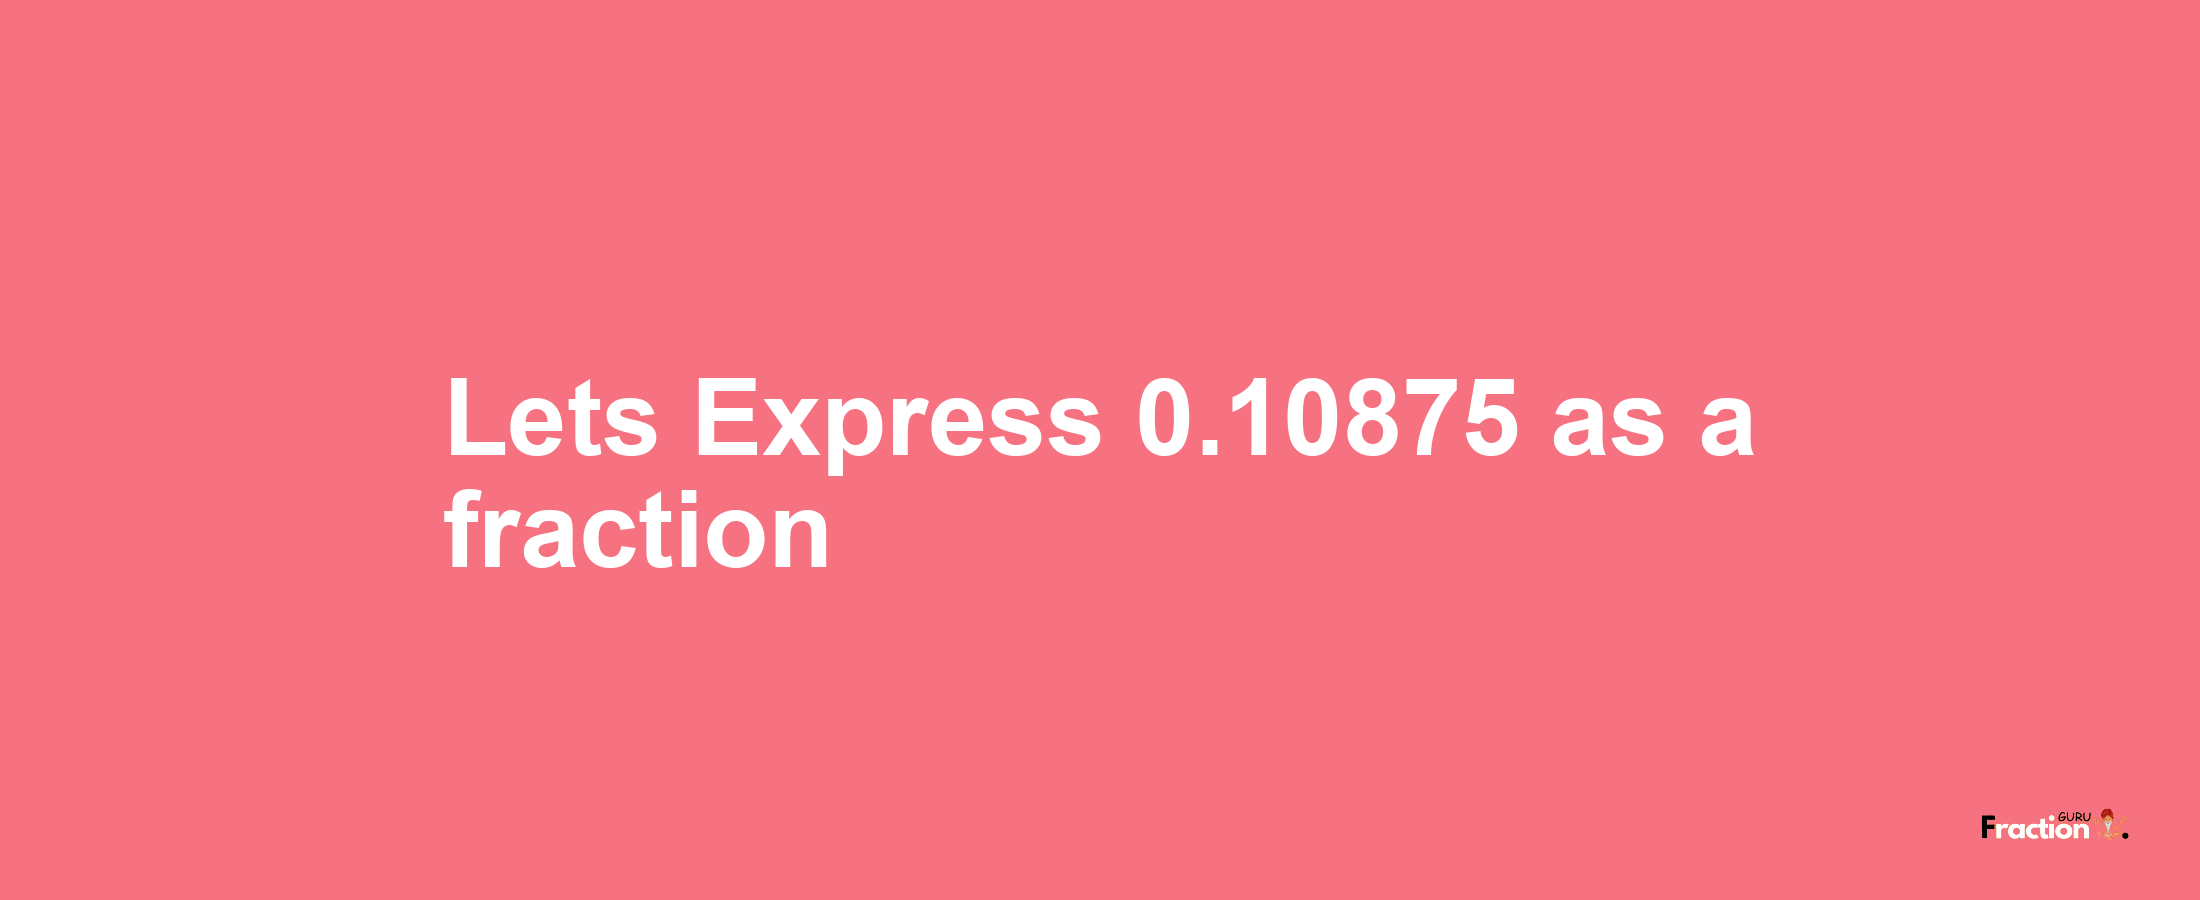 Lets Express 0.10875 as afraction